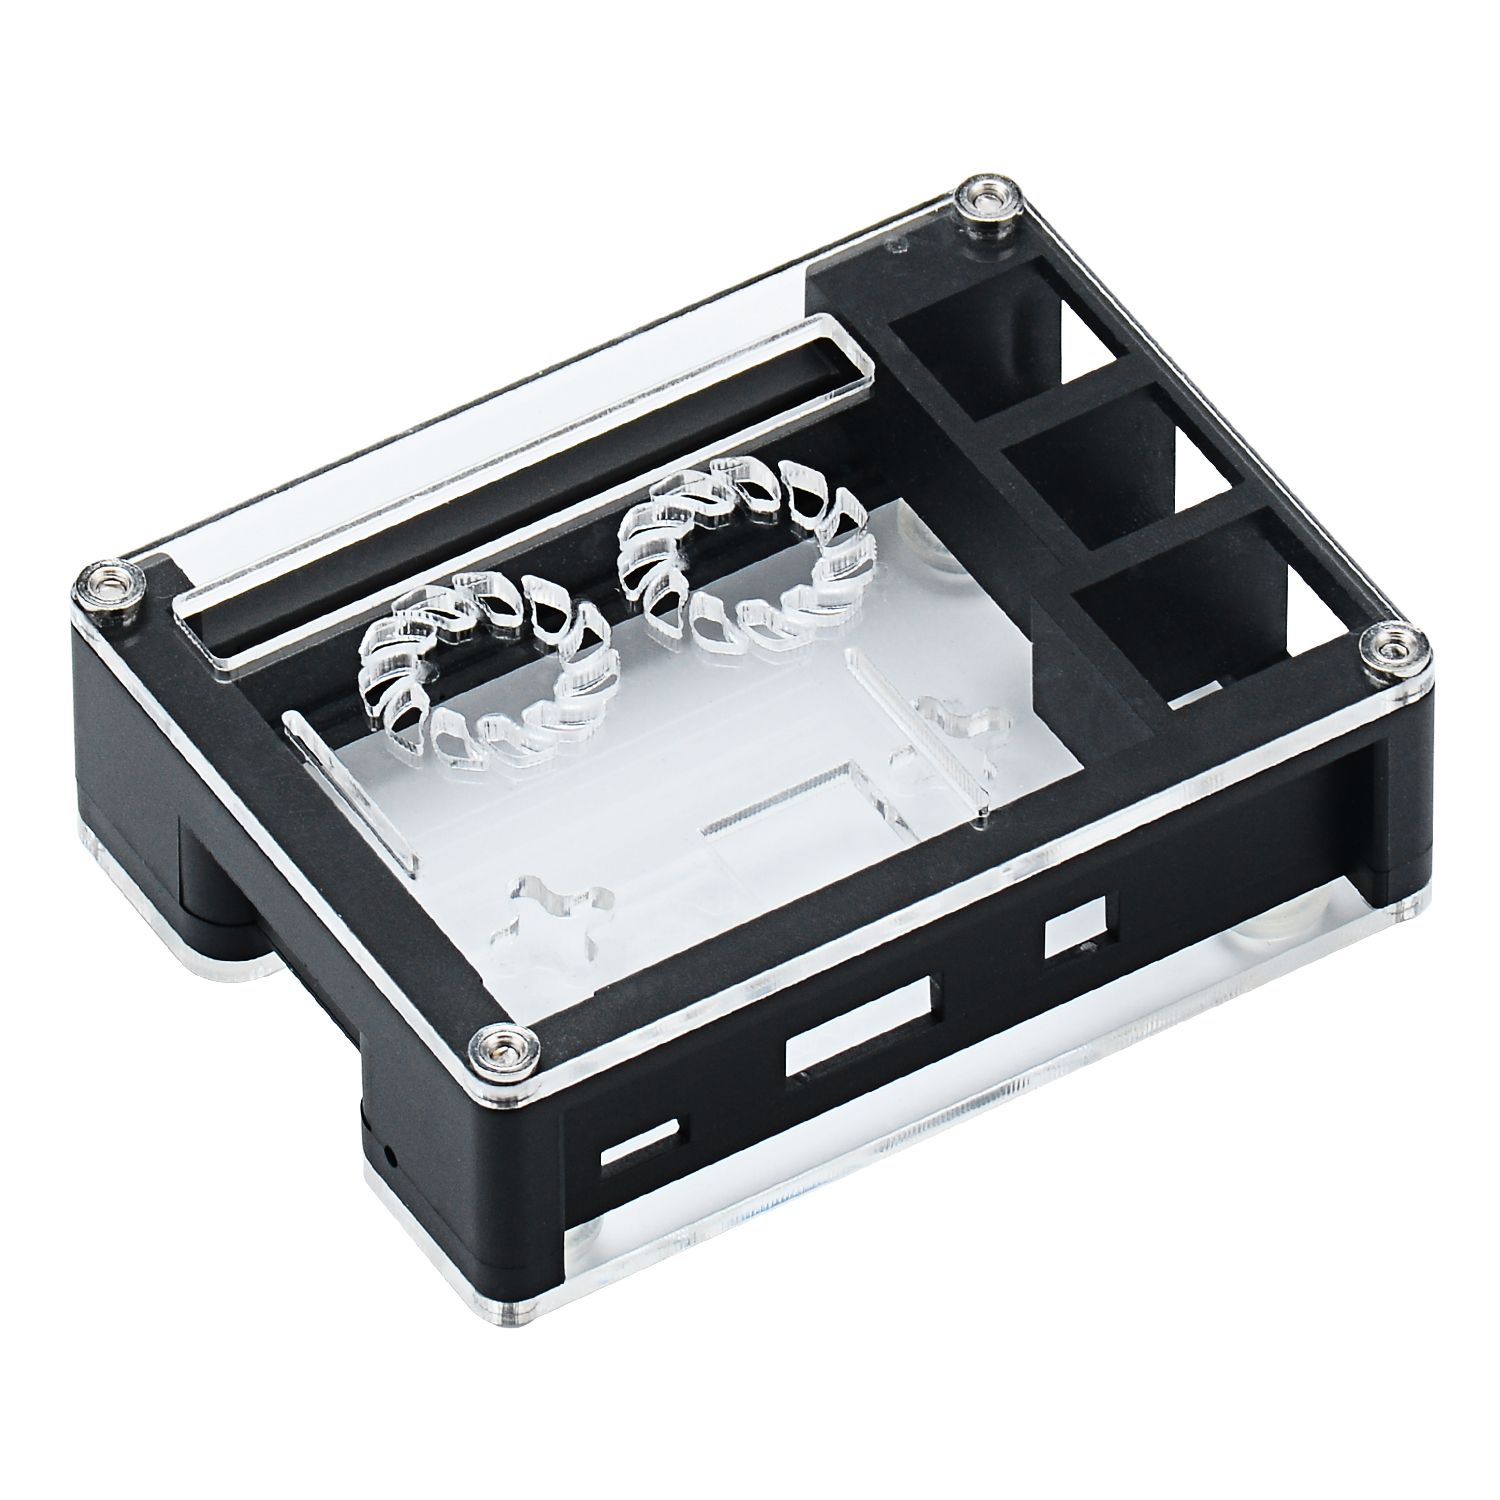 Black-Acrylic-Case-Support-Dual-Cooling-Fans-For-Raspberry-Pi-3B-Board-1411938